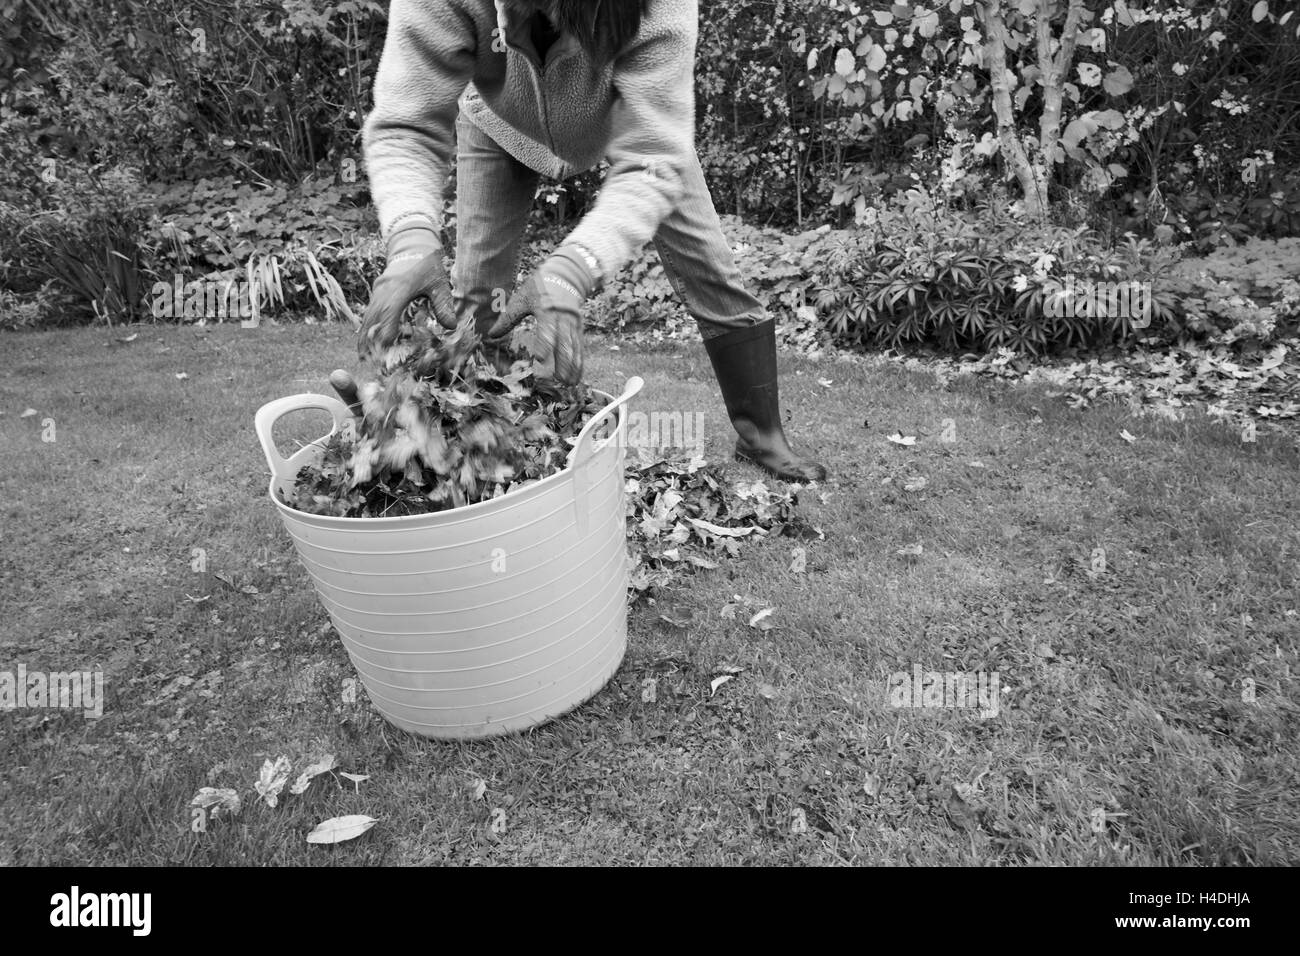 Female in a garden gathering fallen Autumn leaves to make leaf mould compost. Stock Photo